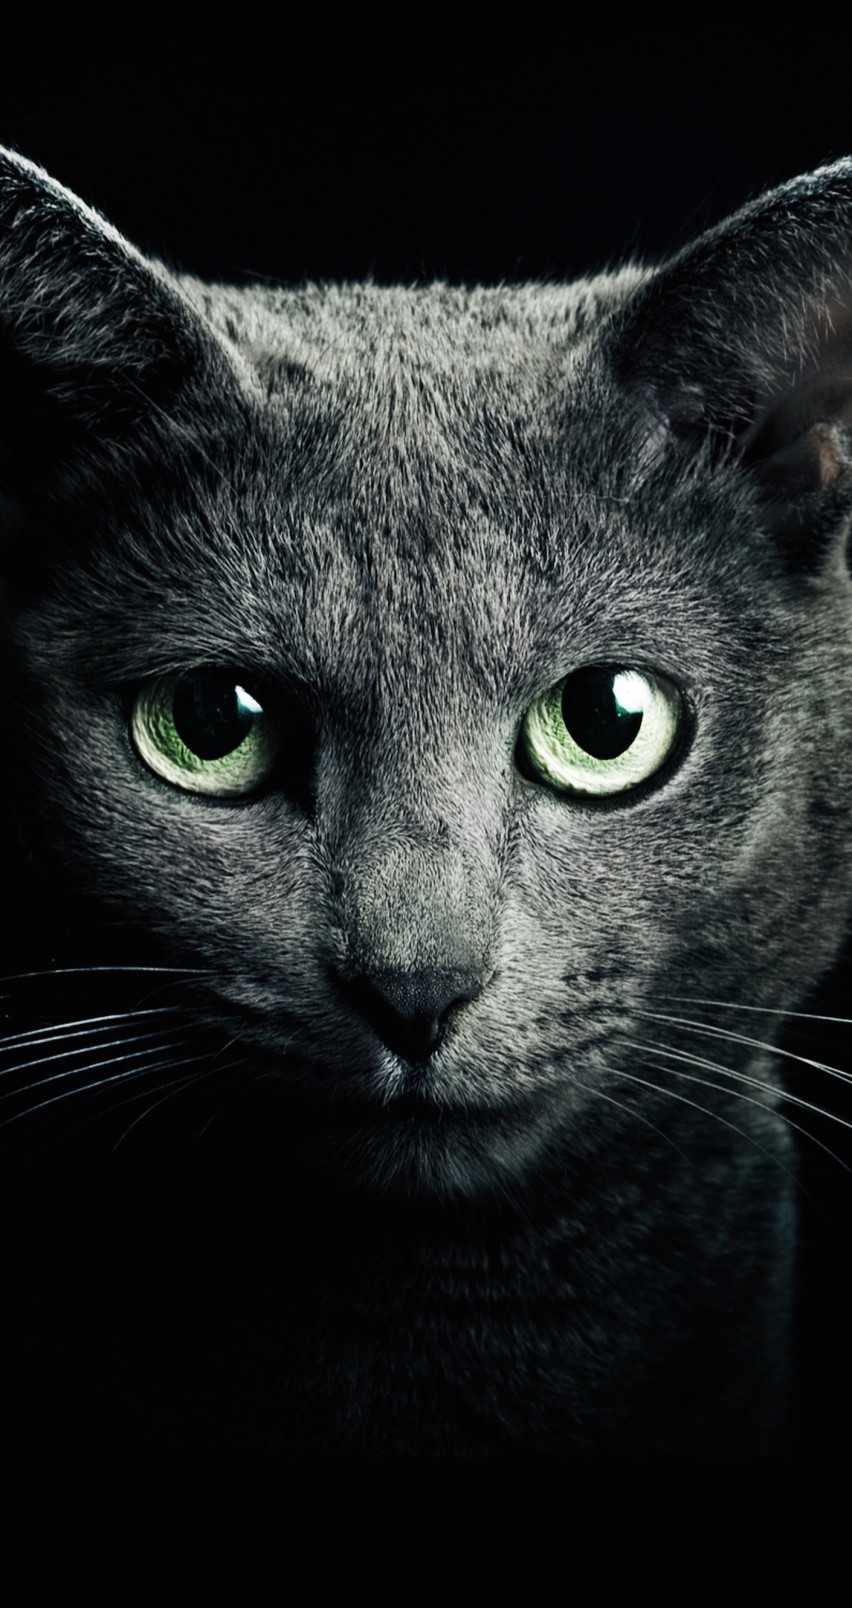 Russian Blue Cat Wallpaper for Apple iPhone 6 / 6s